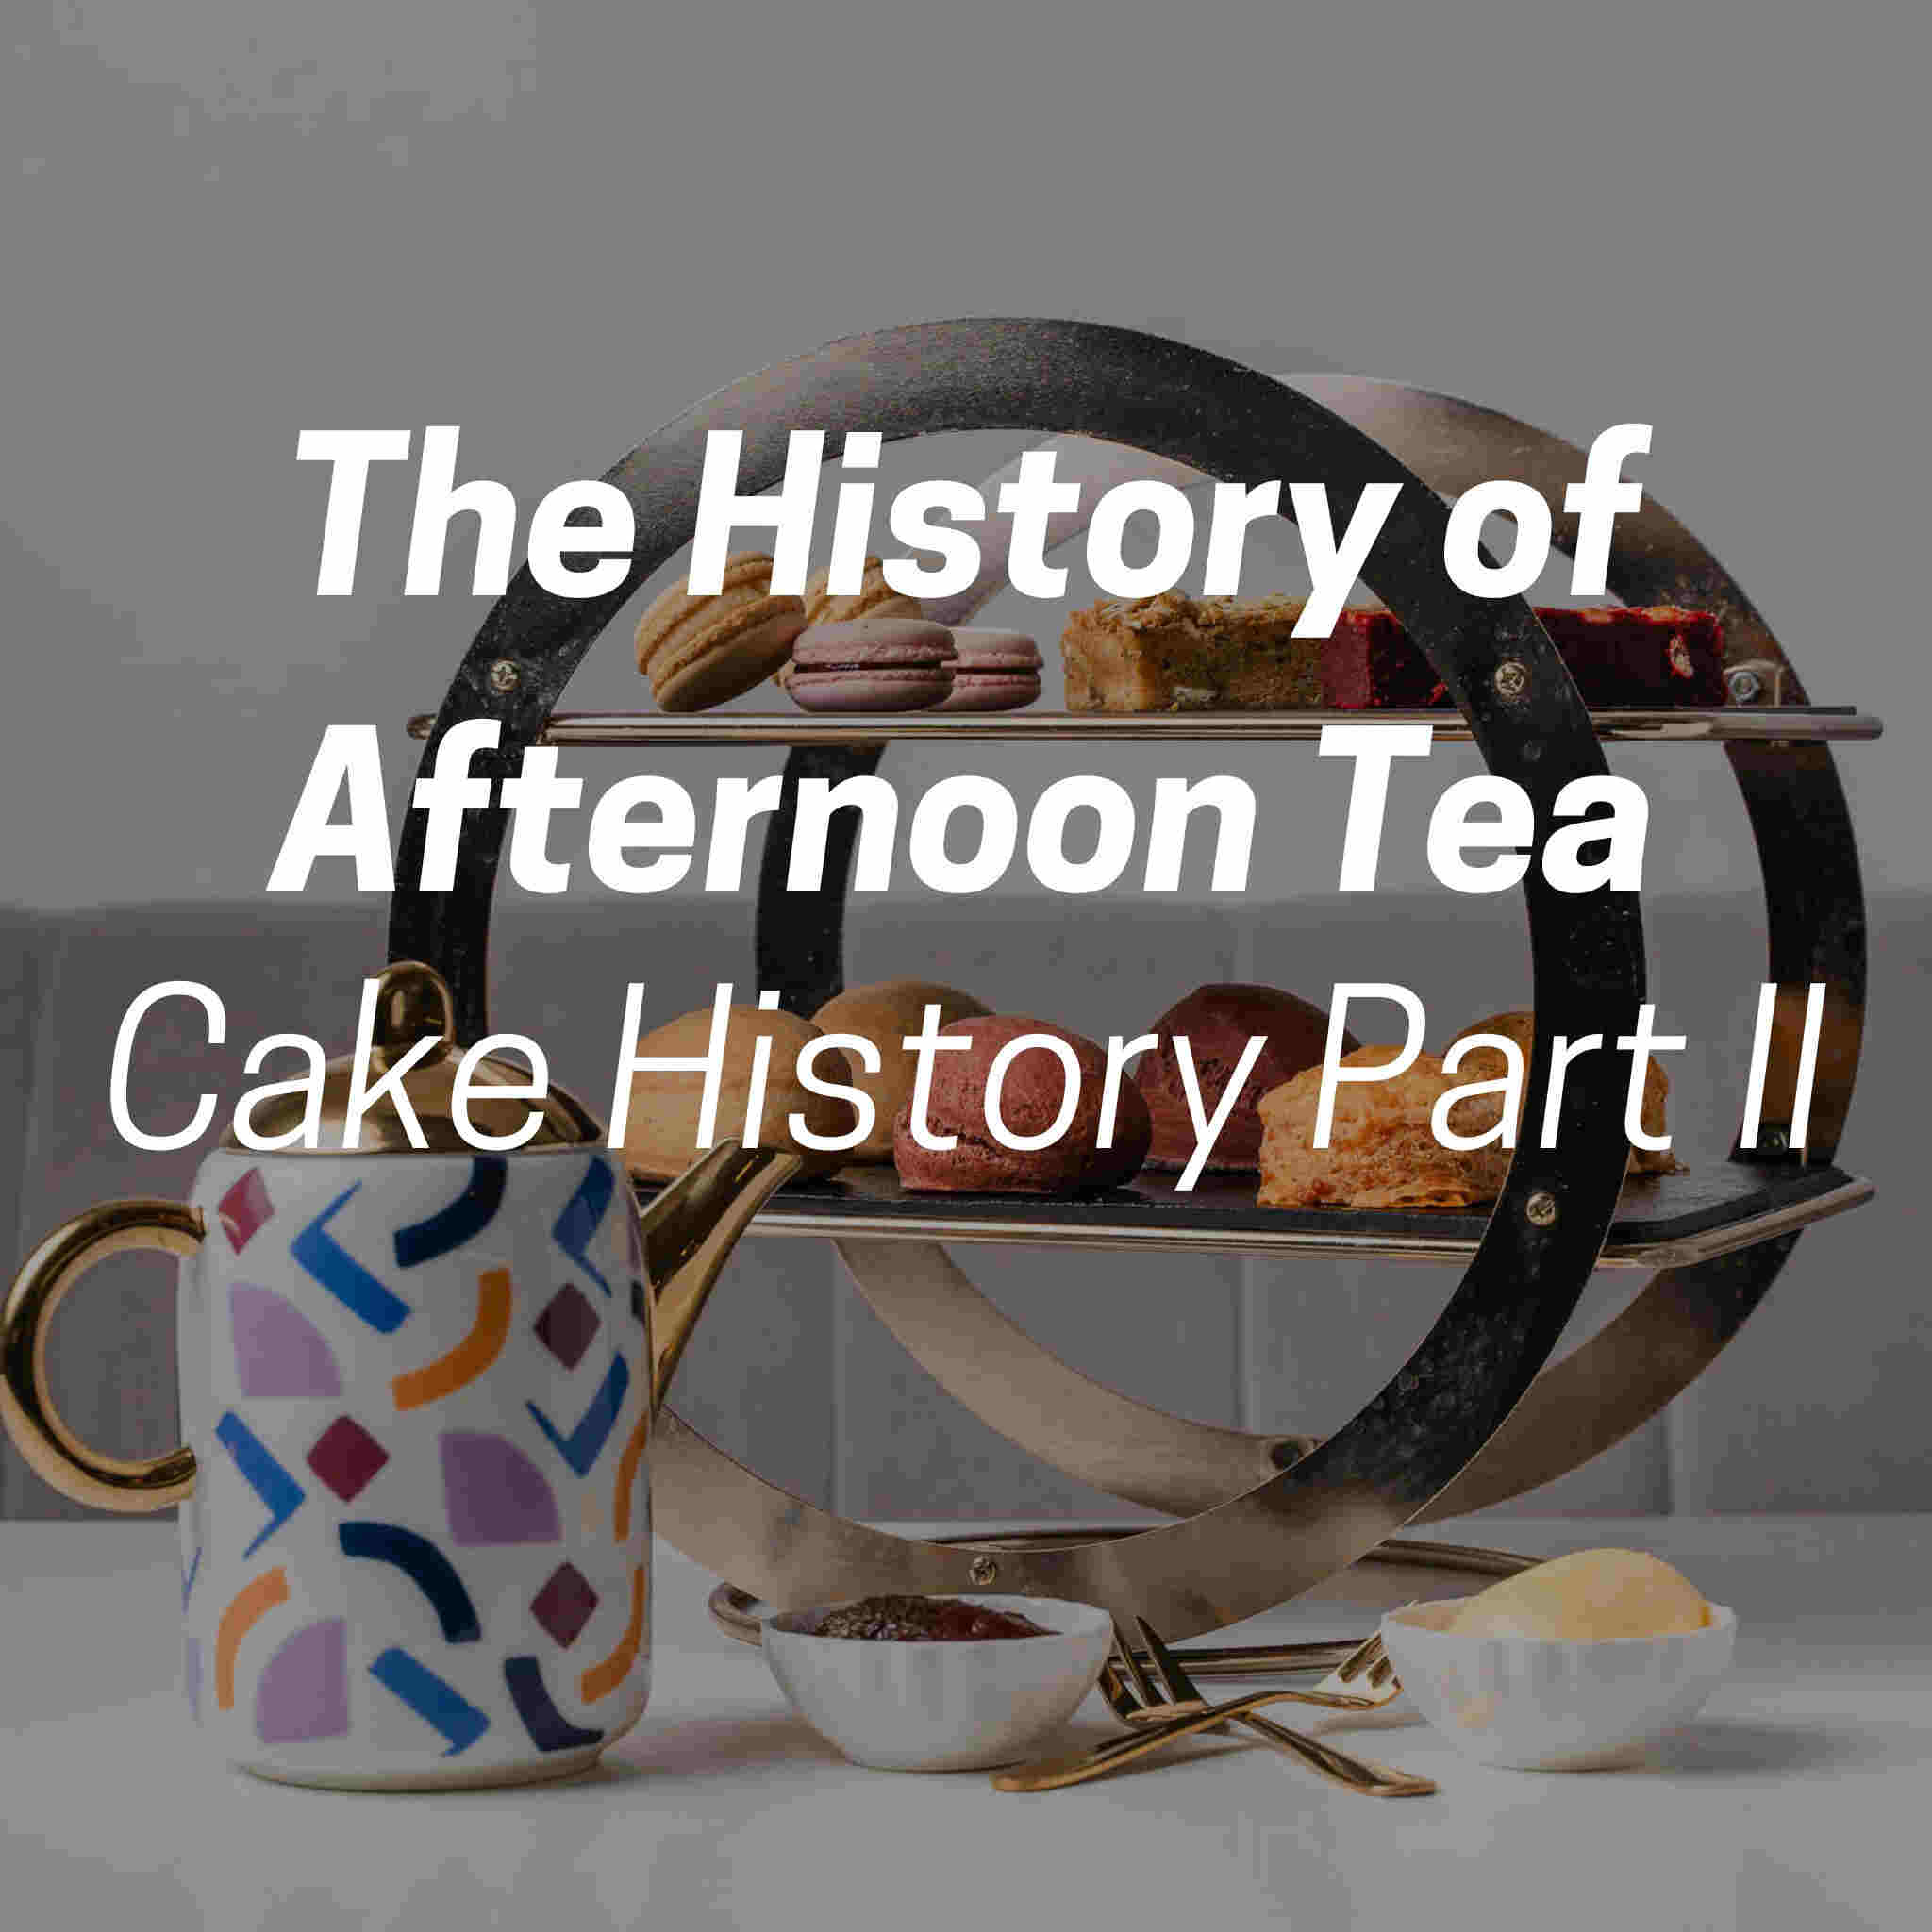 The History of Afternoon Tea (Cake History Part II)